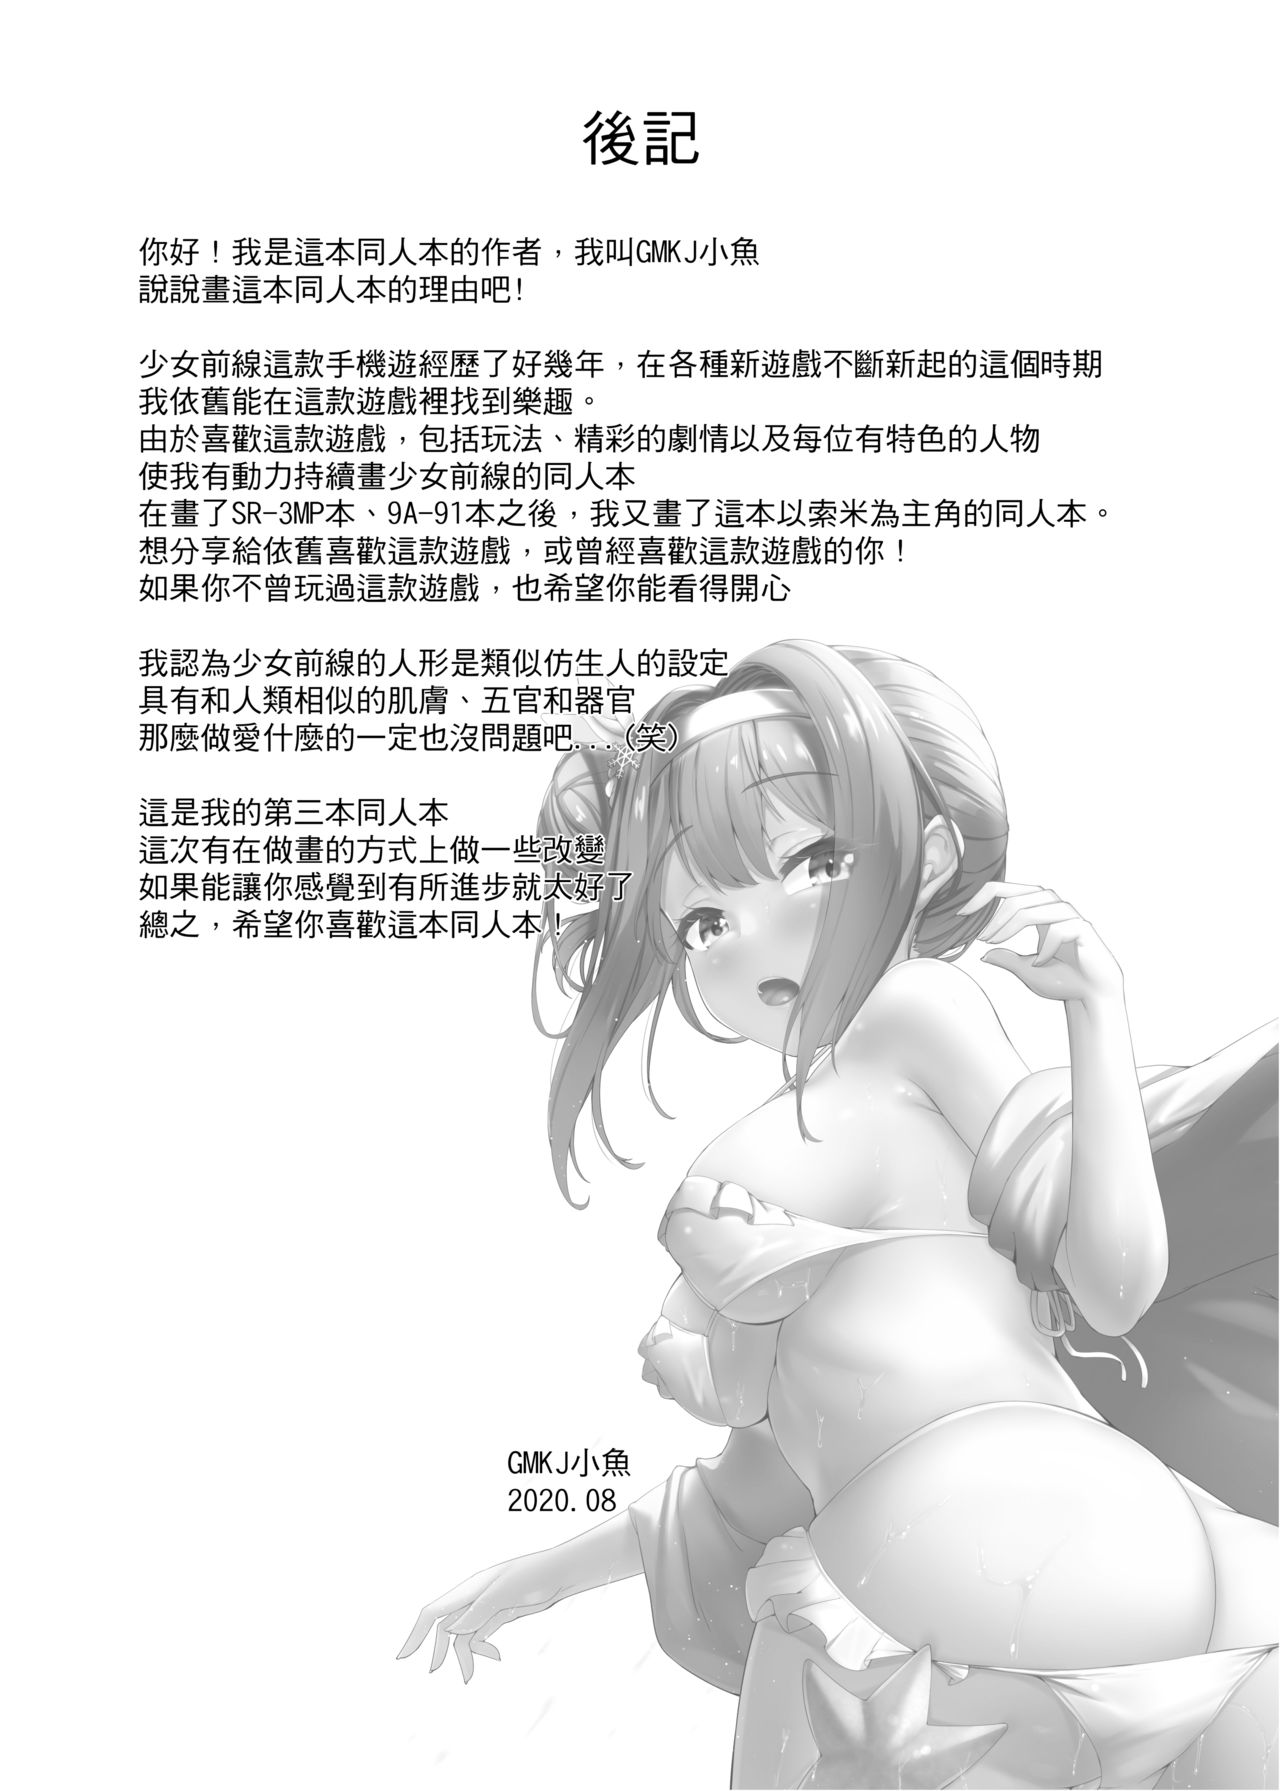 (FF36) [GMKJ] Suomi - Mission of Love (Girls' Frontline) [Chinese] page 28 full